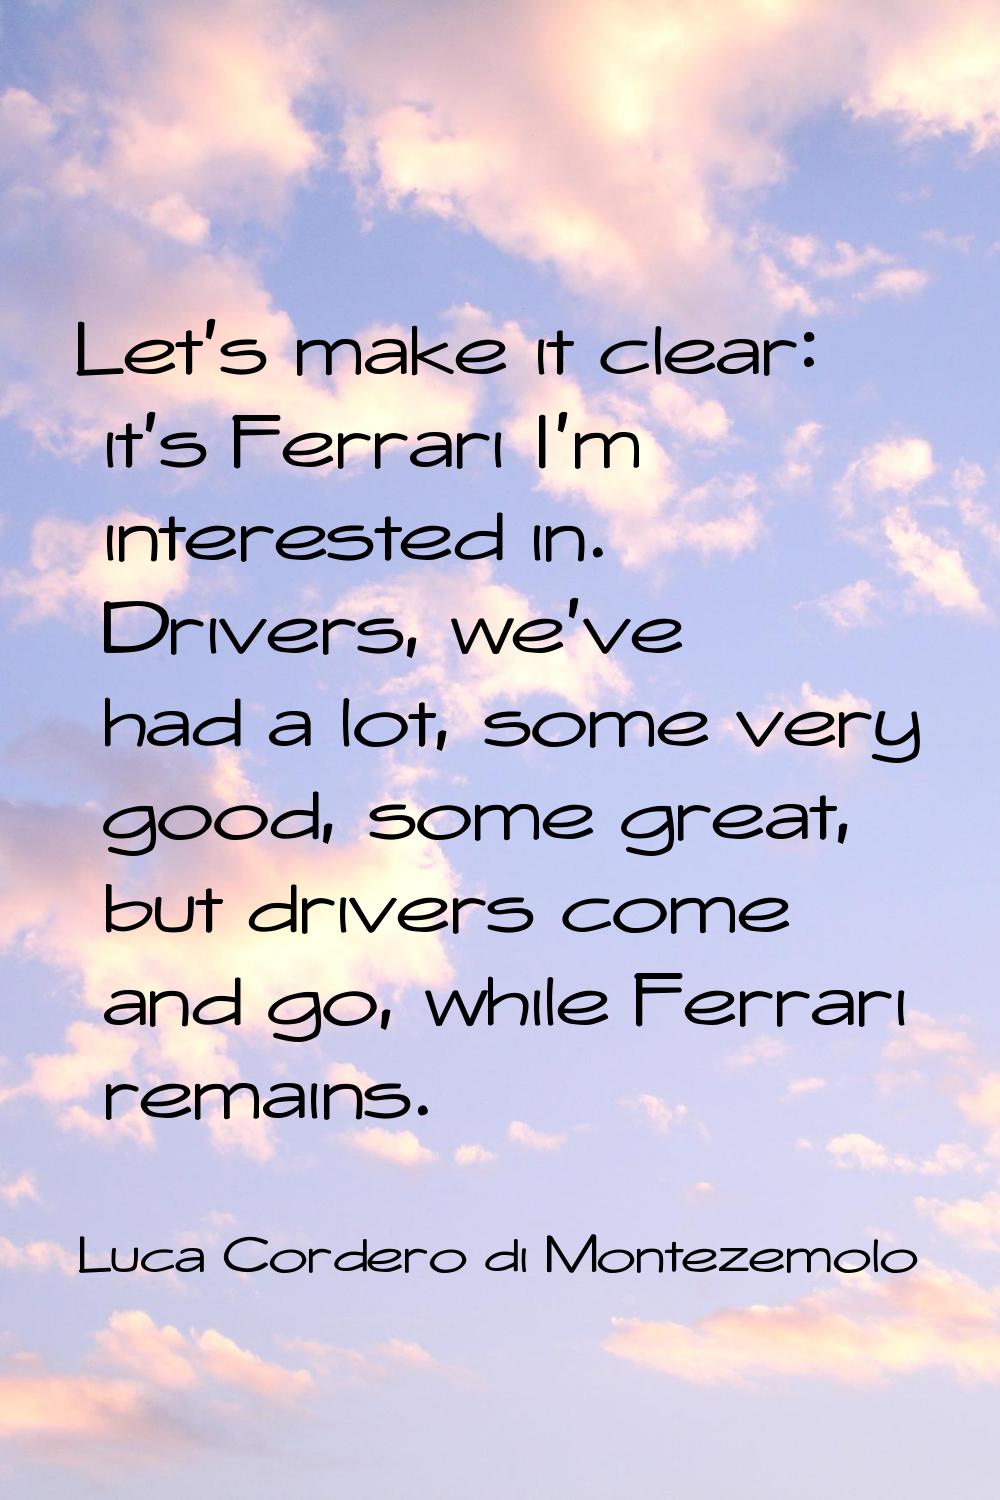 Let's make it clear: it's Ferrari I'm interested in. Drivers, we've had a lot, some very good, some